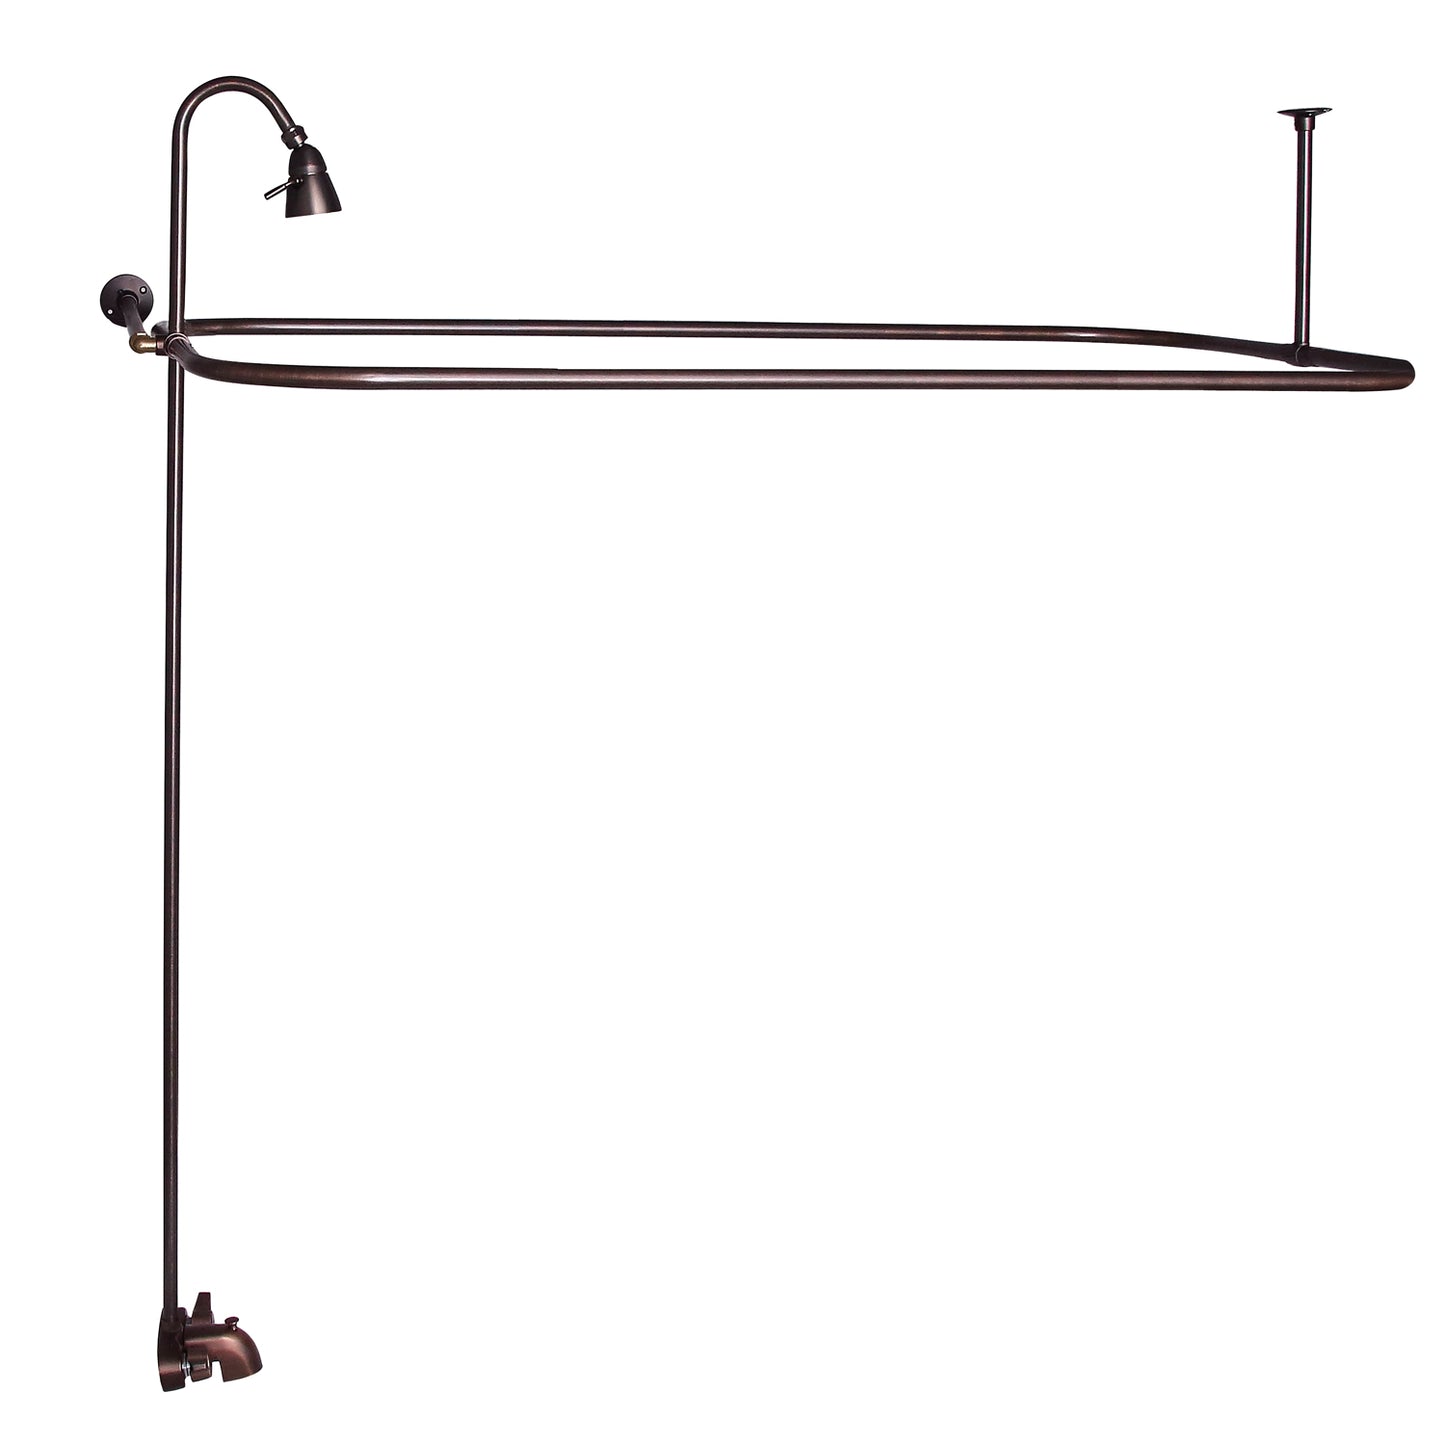 Basic Tub Faucet Kit with 48" x 24" Rod & Shower Head in Oil Rubbed Bronze